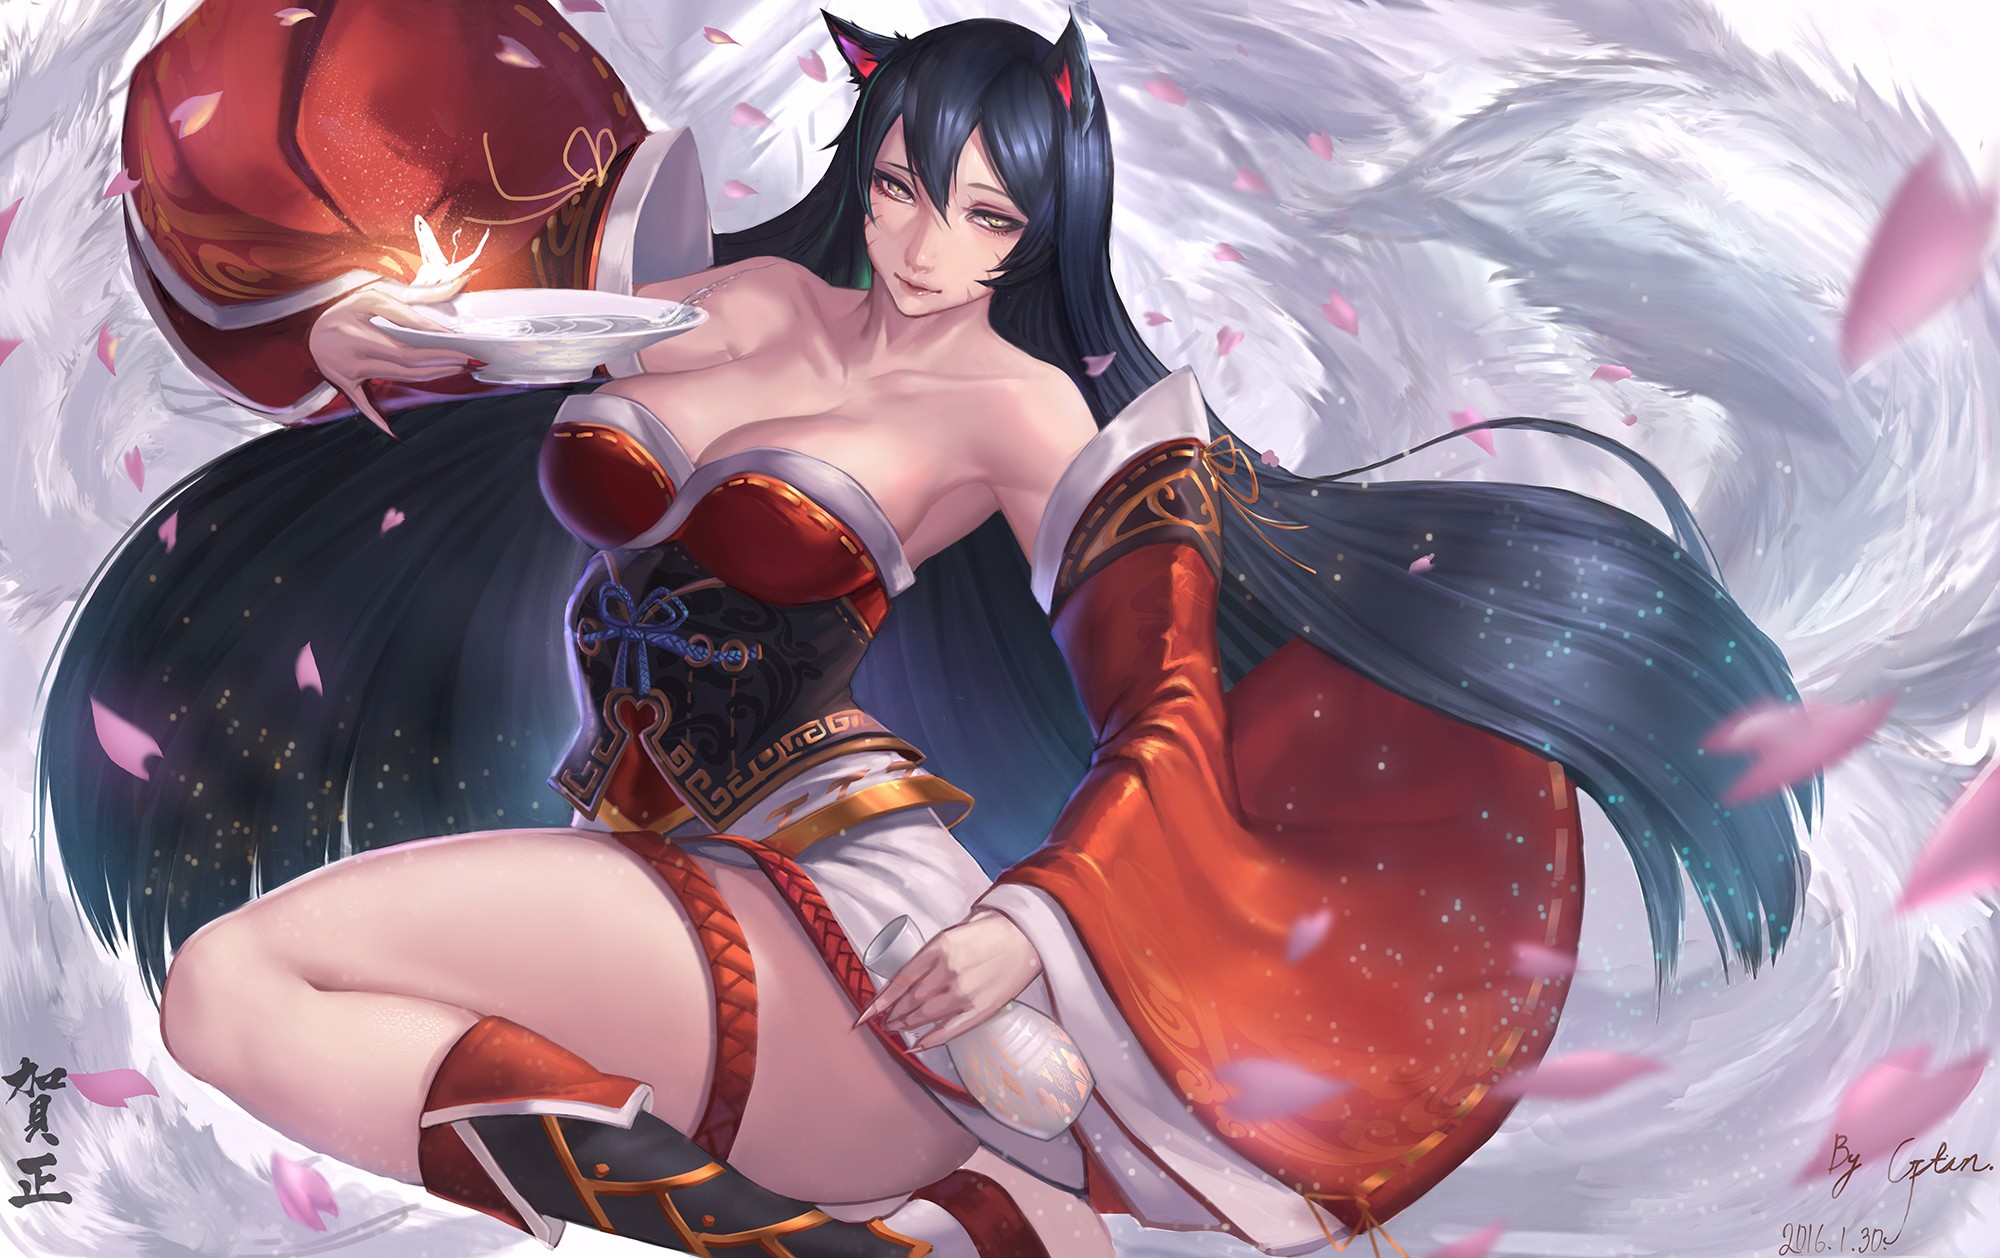 Anime 2000x1258 anime anime girls League of Legends Ahri (League of Legends) animal ears tail fox girl PC gaming Pixiv boobs thighs curvy women video game girls video game art fantasy art fantasy girl